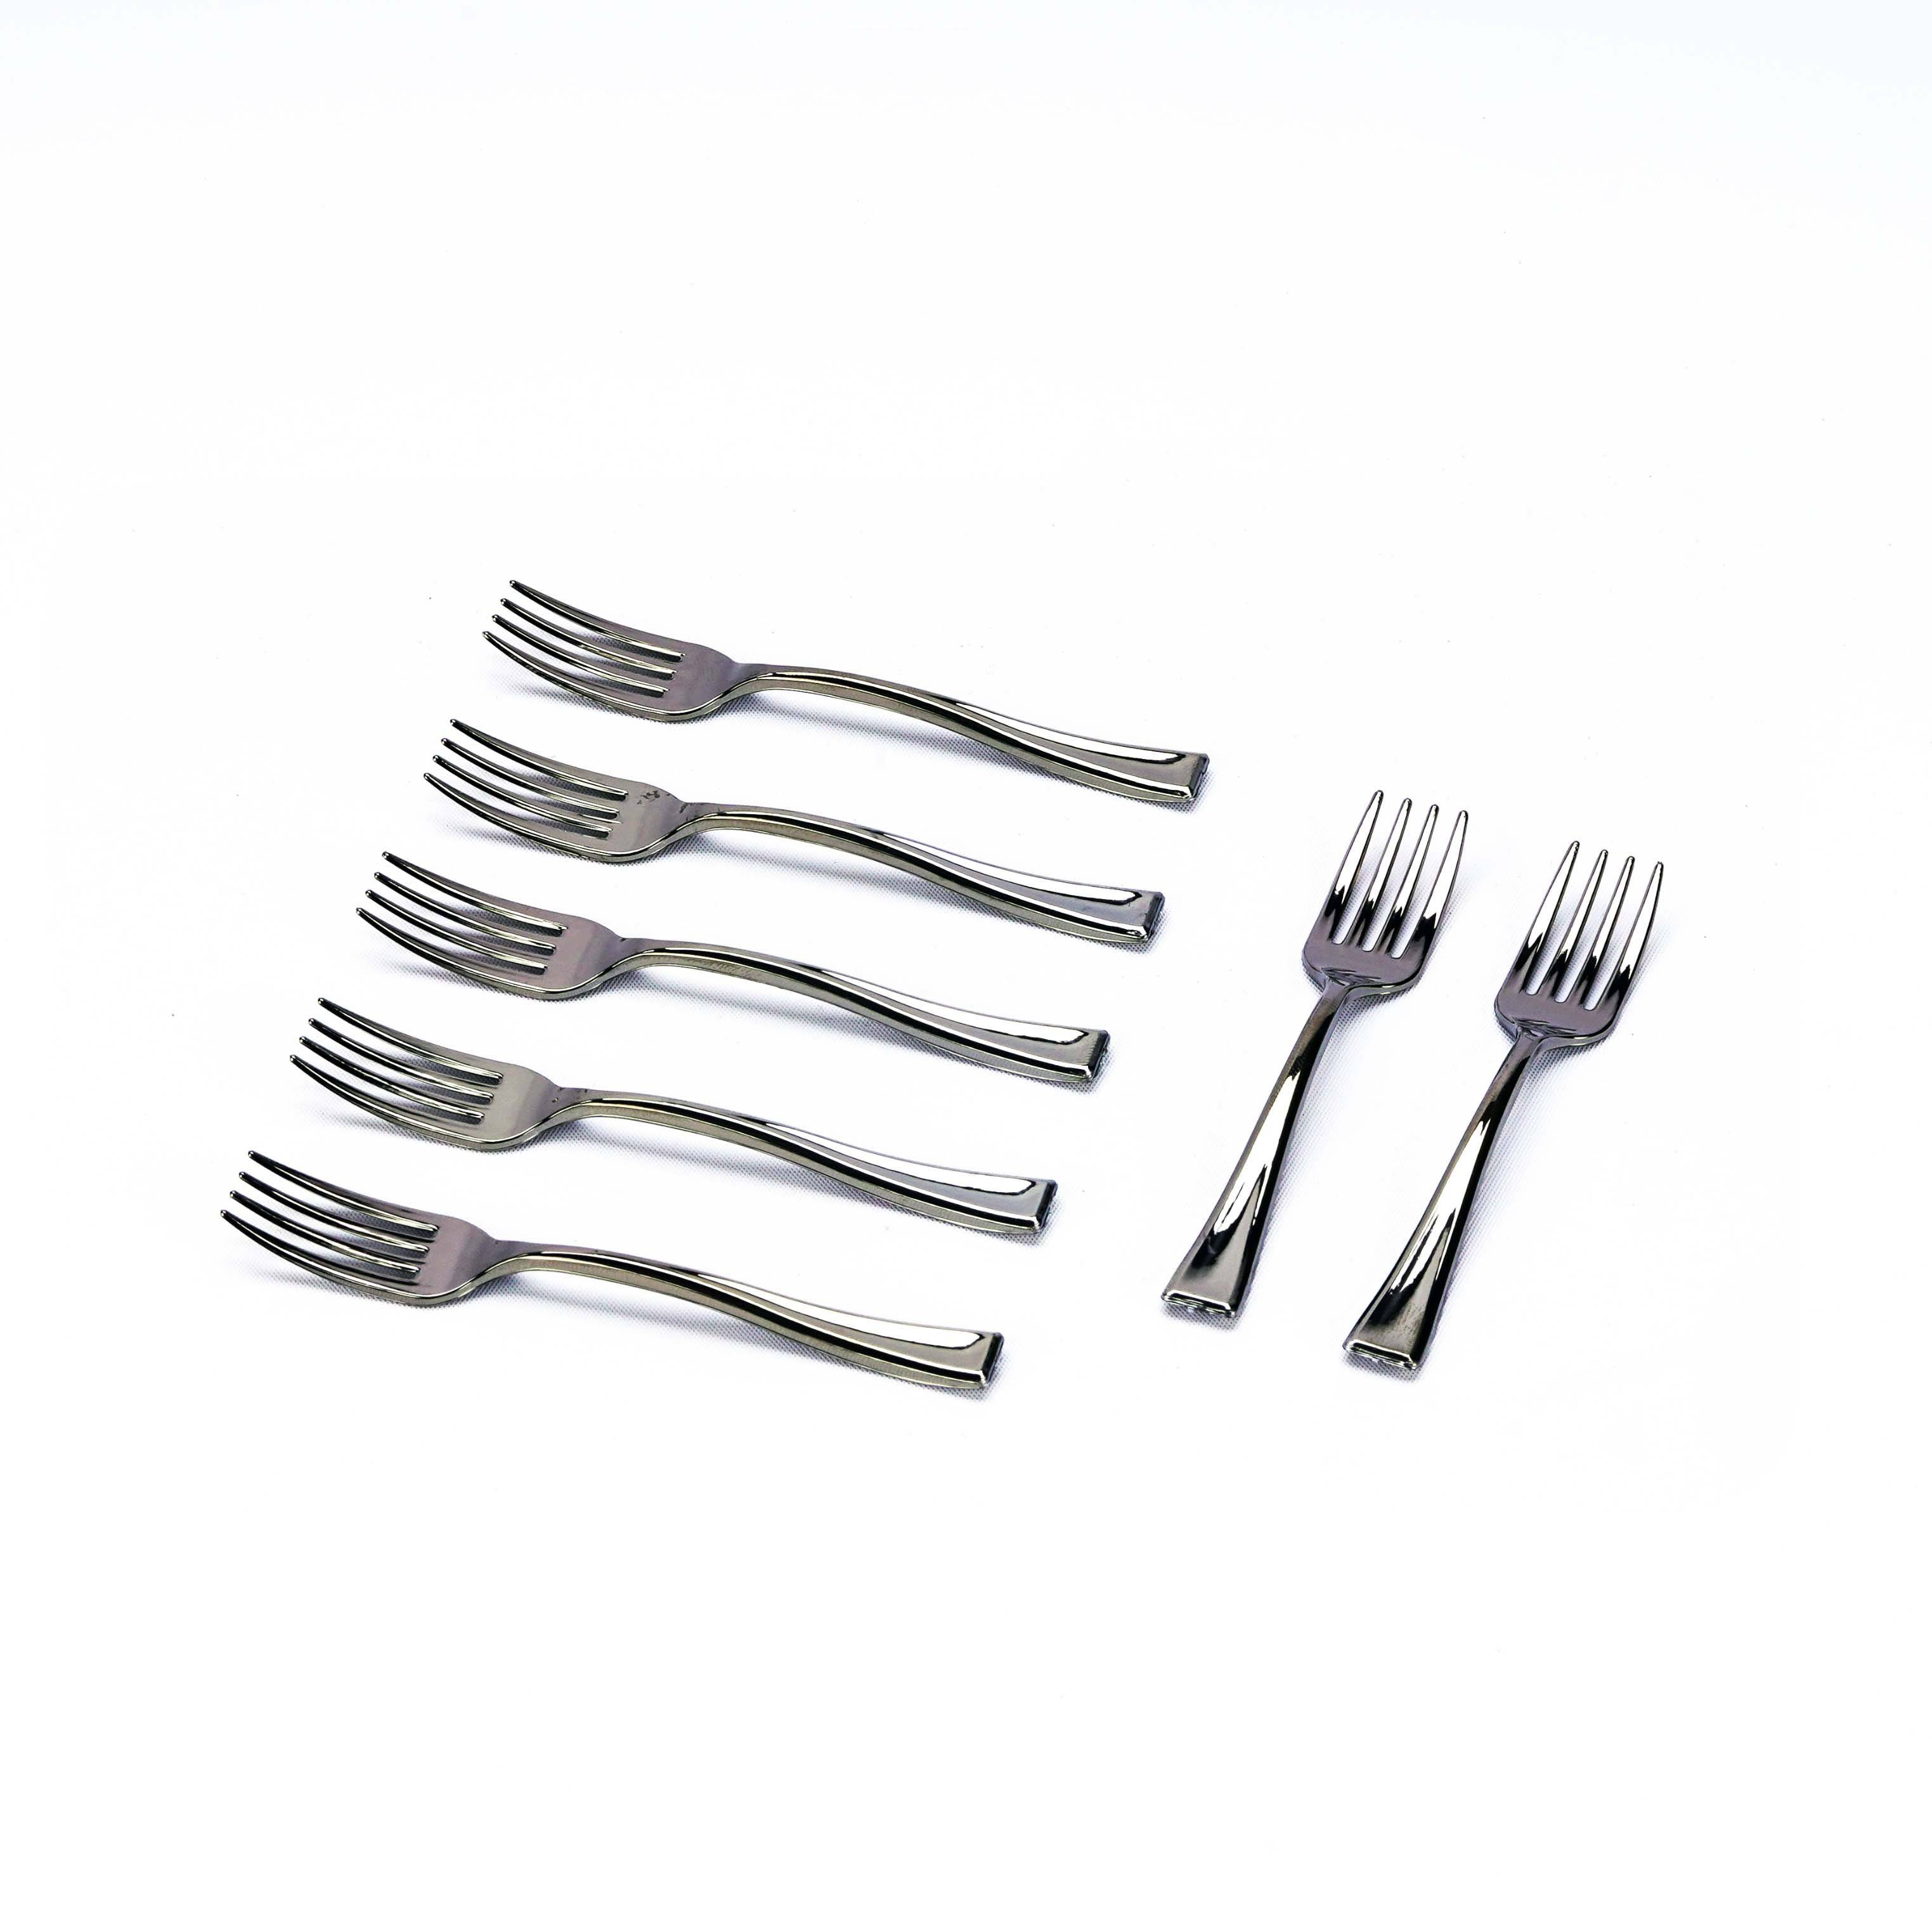 Mini-Tasting Silver Forks 50 Pieces - Hotpack Global